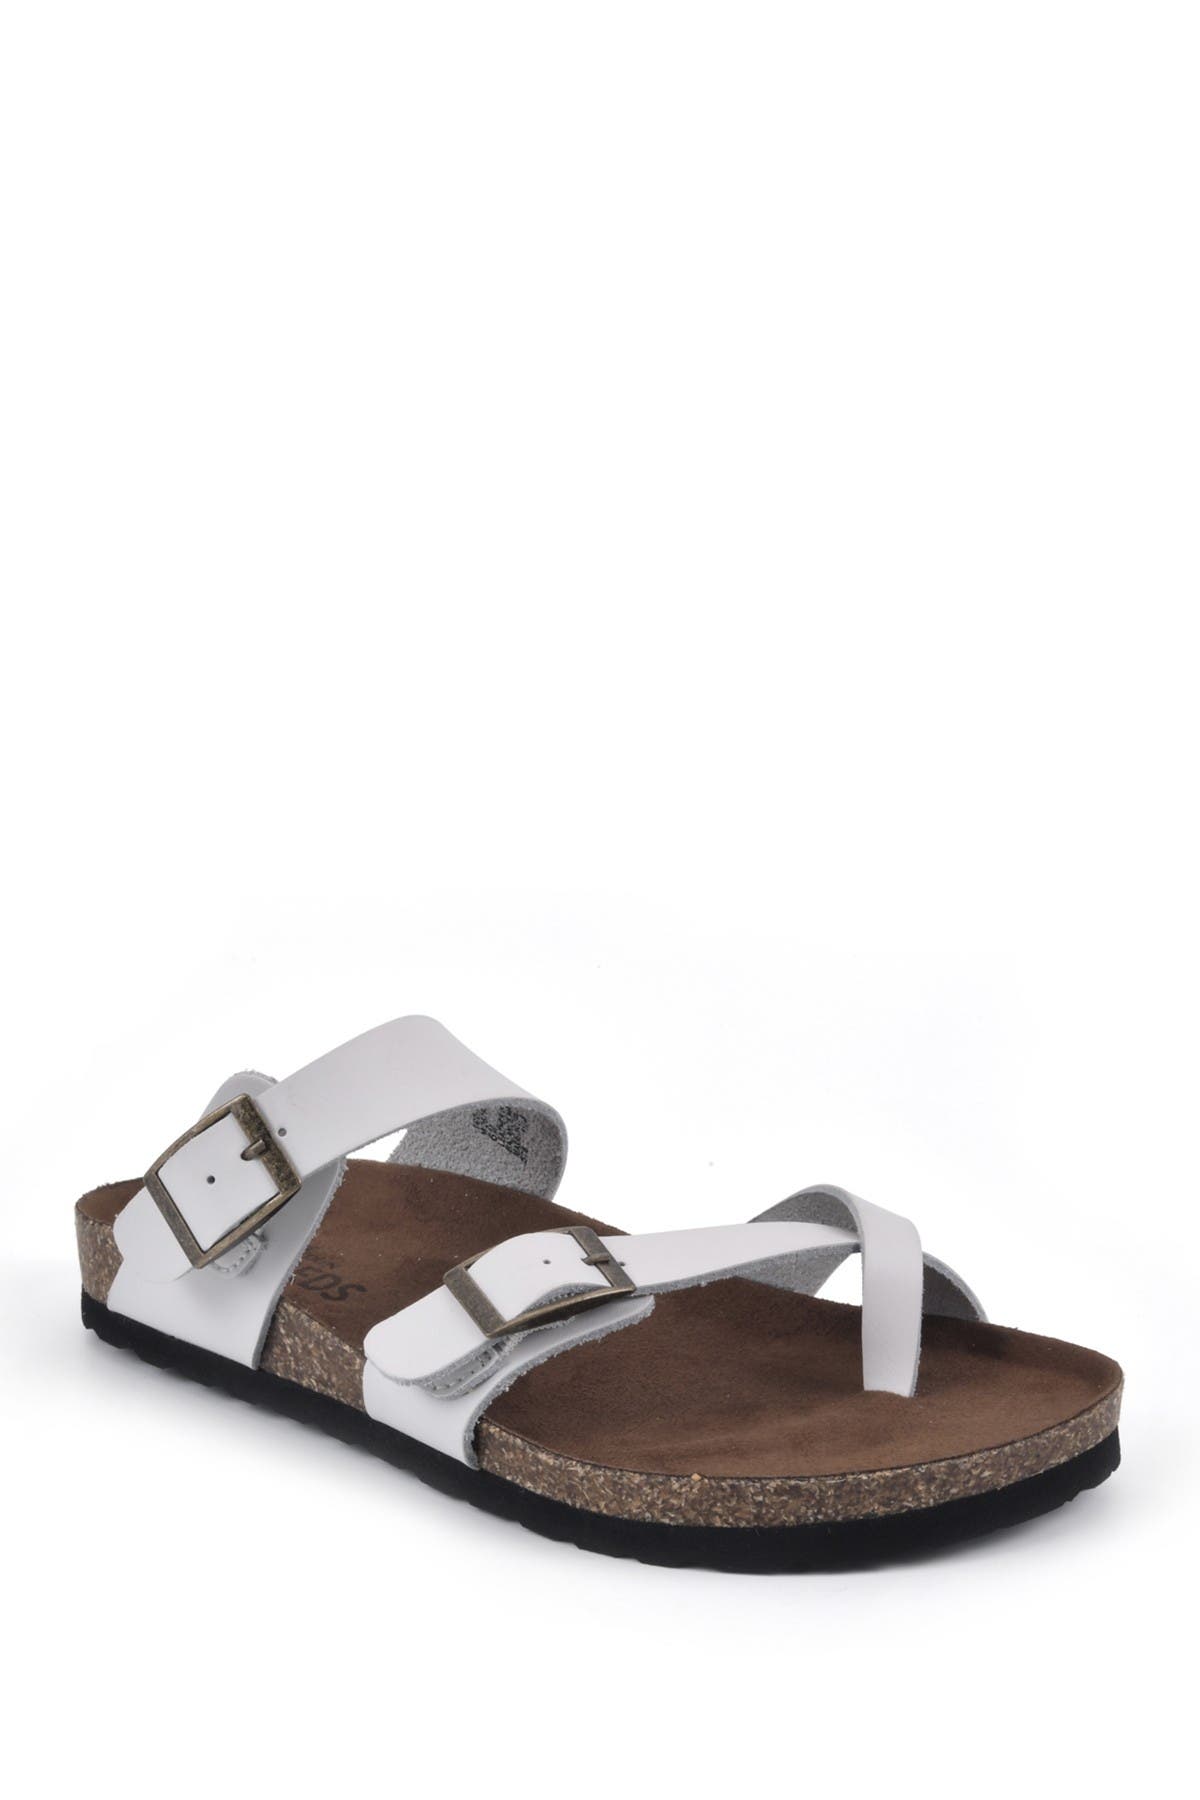 White Mountain Footwear Gracie Double Buckle Sandal In White/leather